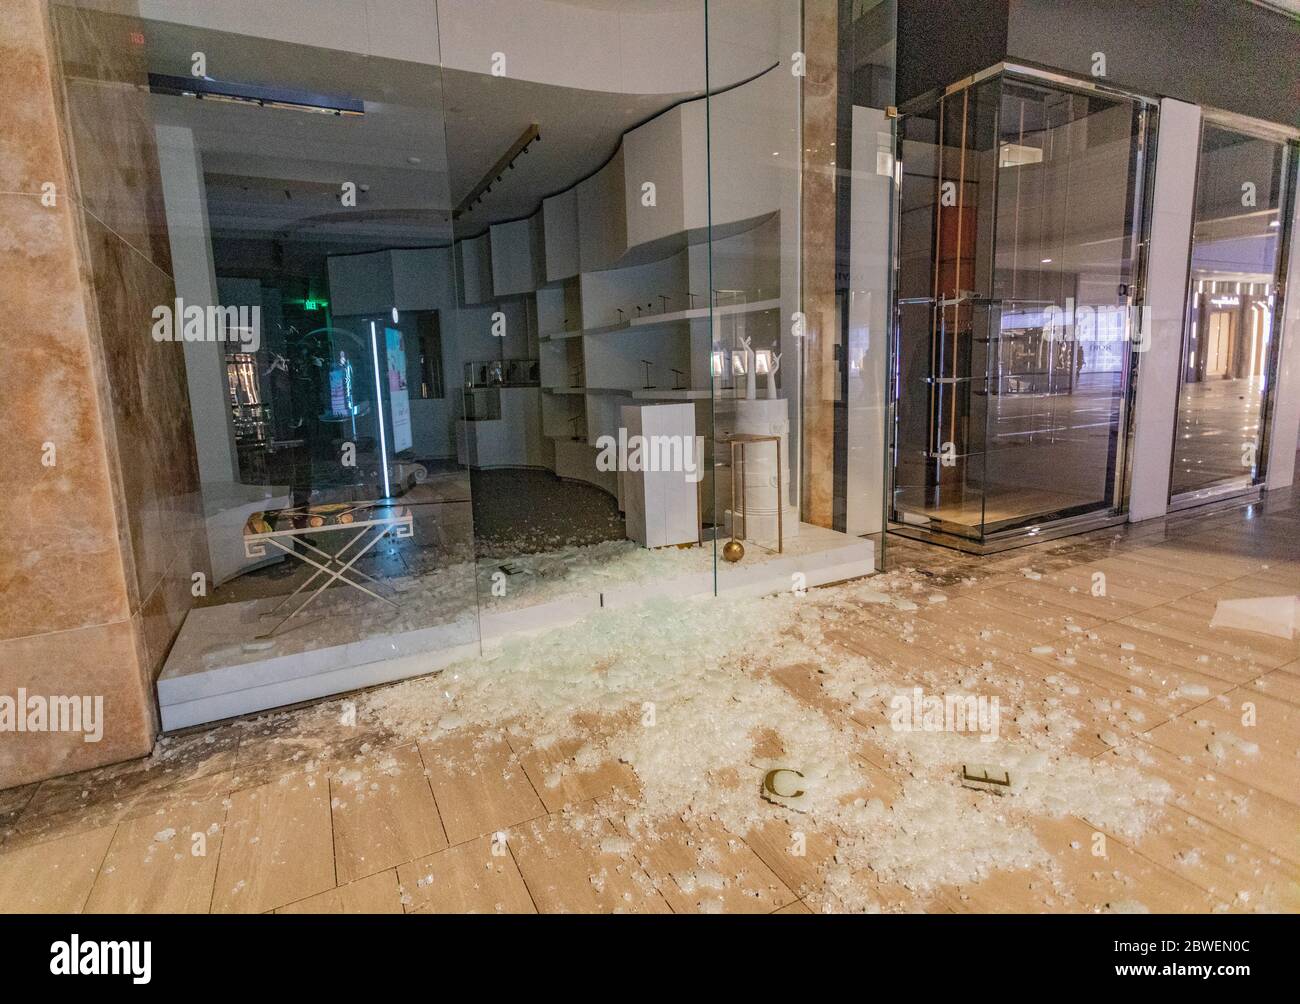 May 31, 2020, Boston, Massachusetts, USA: Looted Louis Vuitton store front  inside Copley Place in